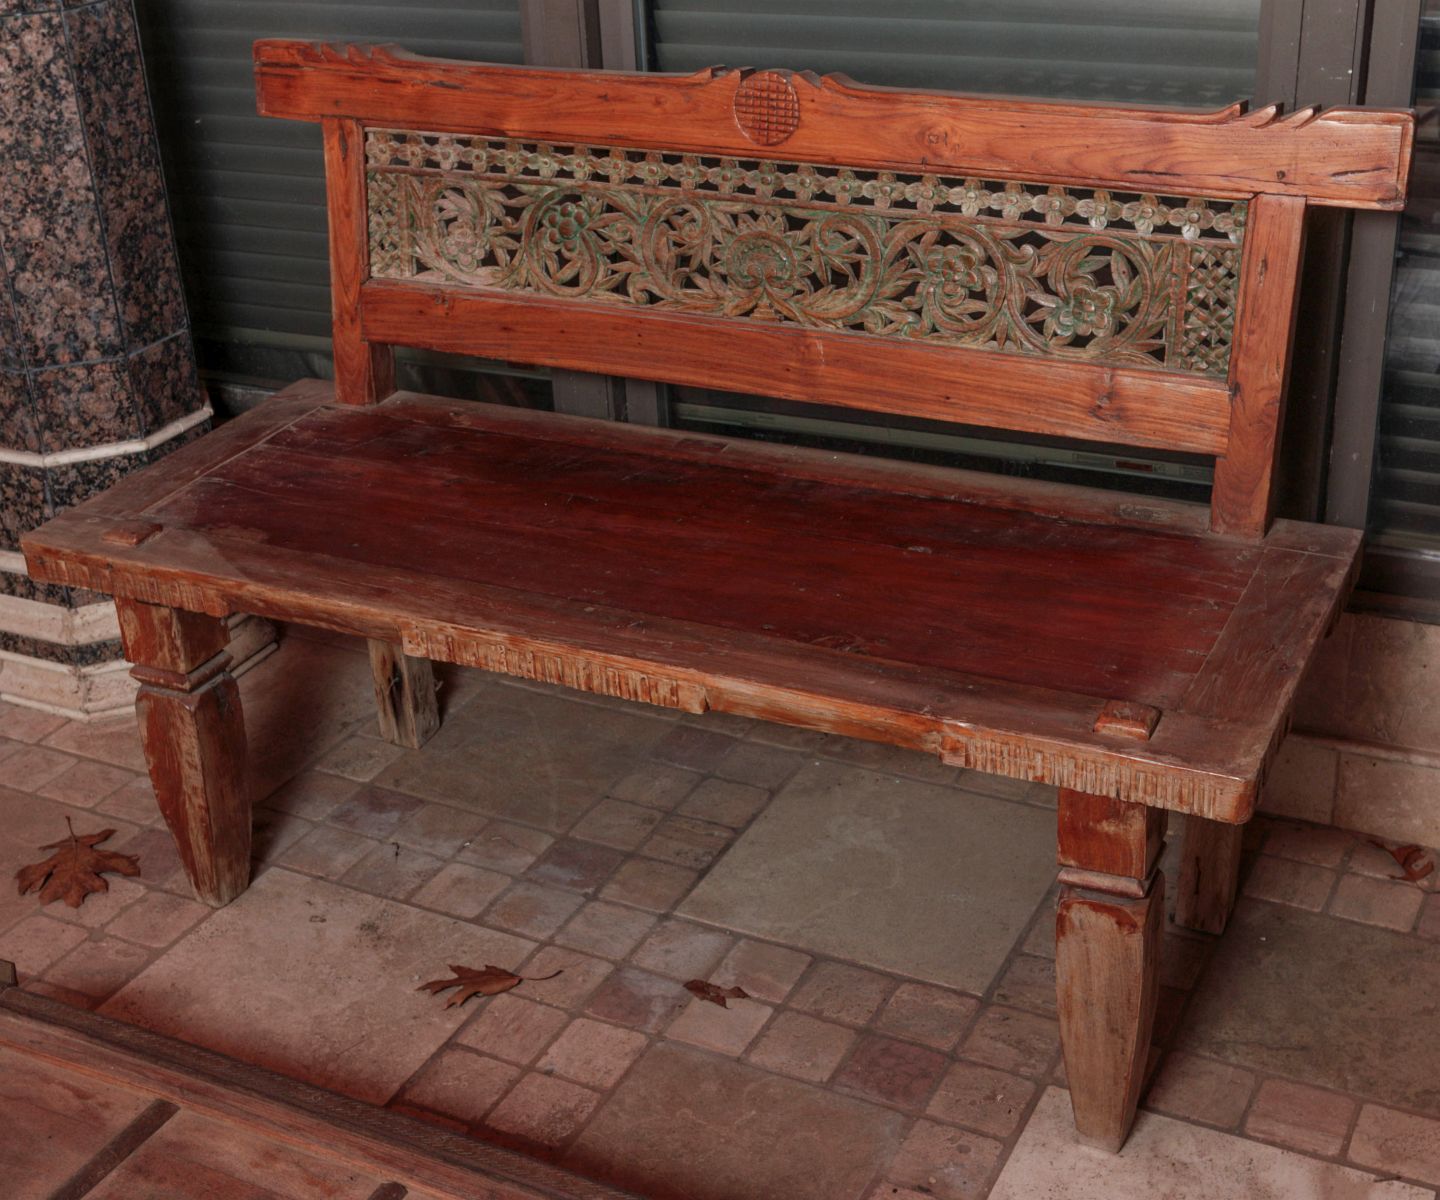 AN INTERESTING ASIAN CARVED TEAK WOOD BENCH